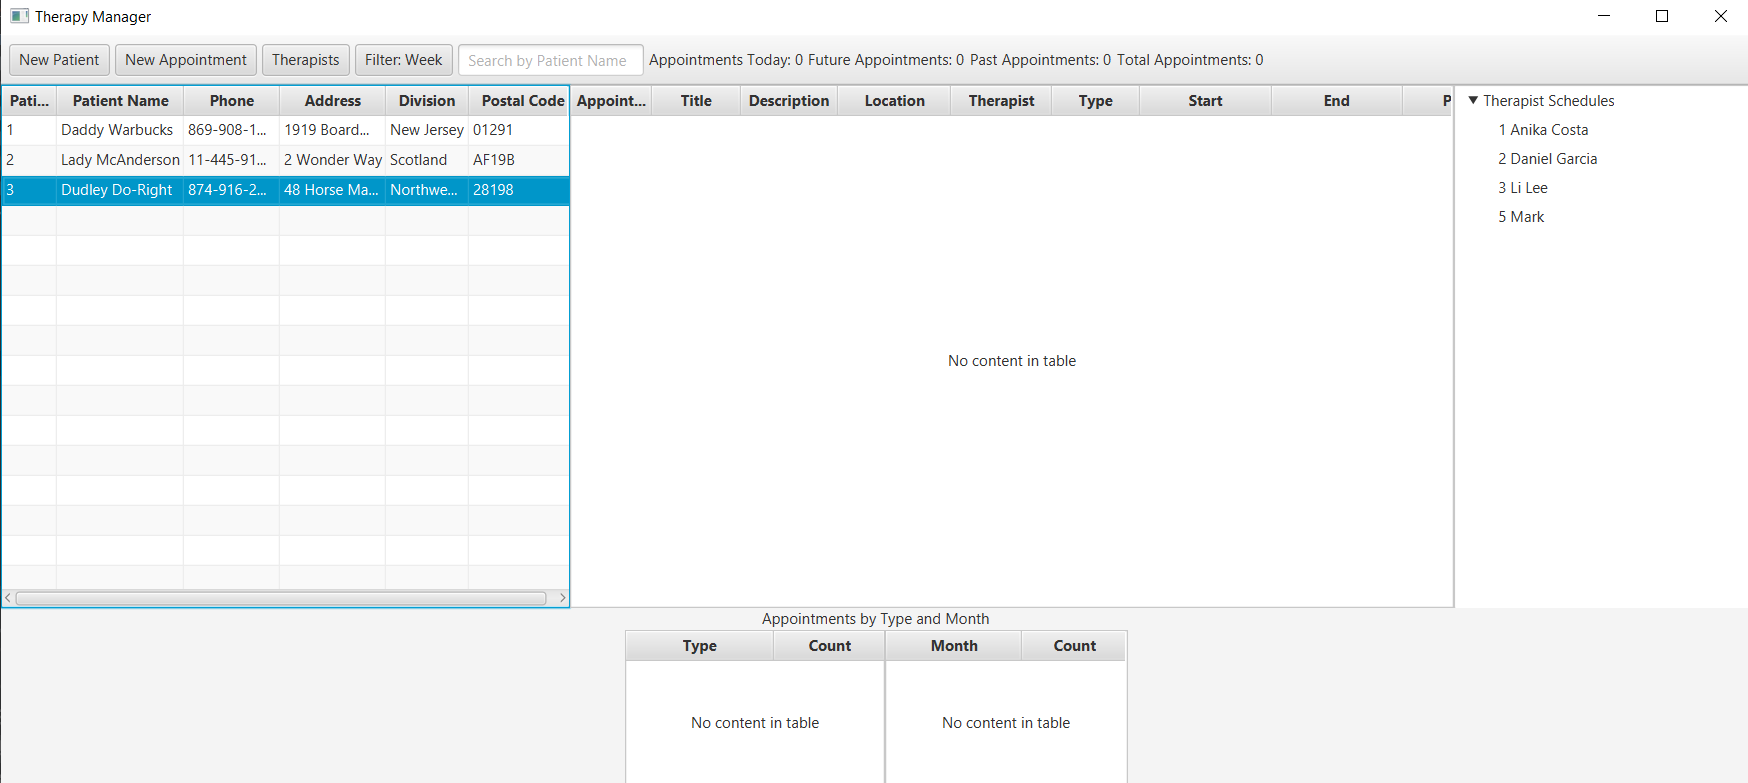 Main screen of the Appointment Tracker project